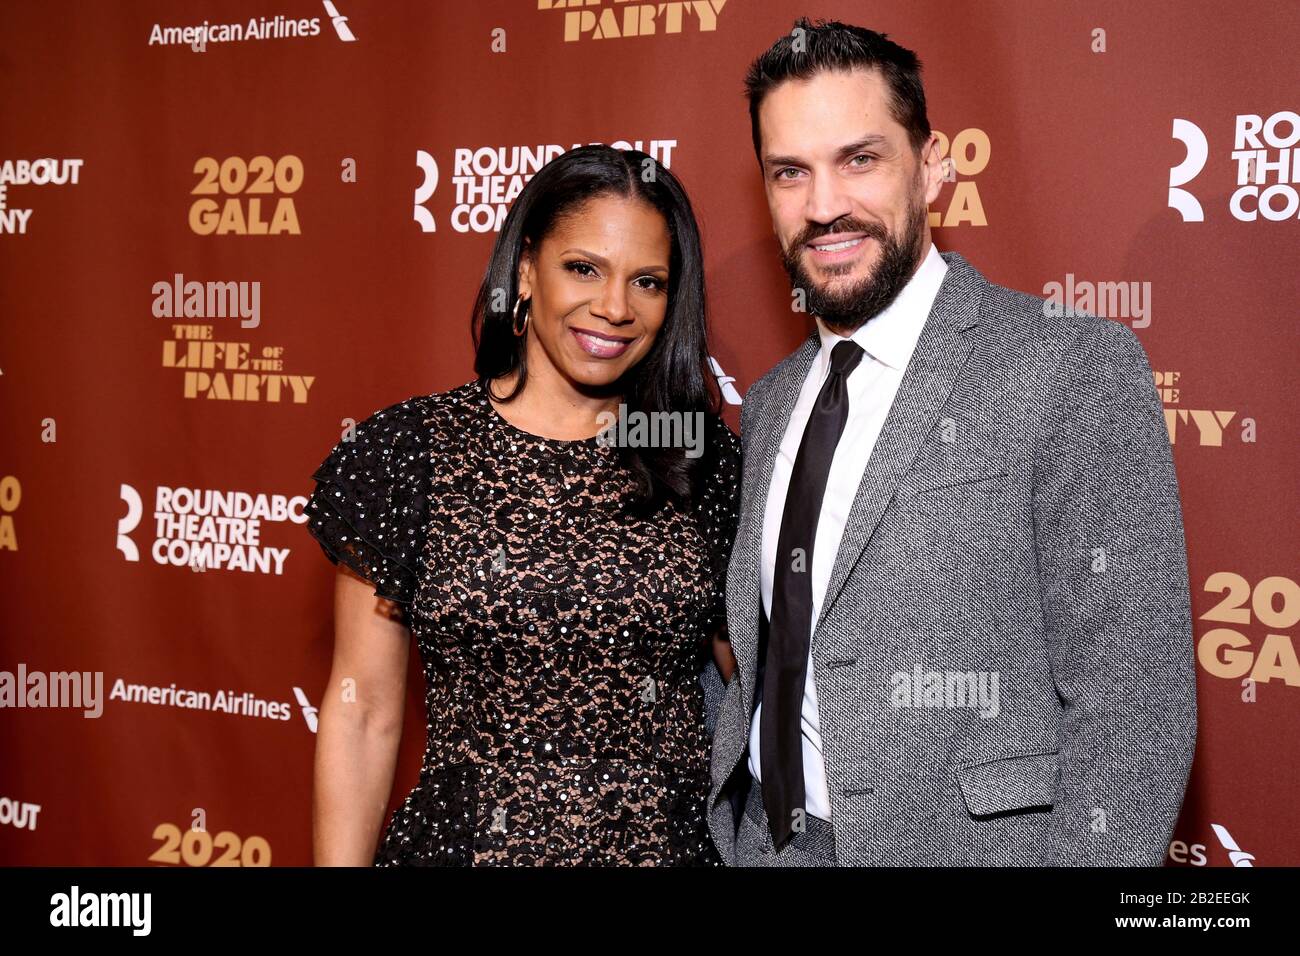 New York, NY, USA. 2nd Mar, 2020. Audra McDonald and Will Swenson at the arrivals for the Roundabout Theatre CompanyÕs 2020 Gala at the Ziegfeld Ballroom on March 2, 2020 in New York City. Credit: Joseph Marzullo/Media Punch/Alamy Live News Stock Photo